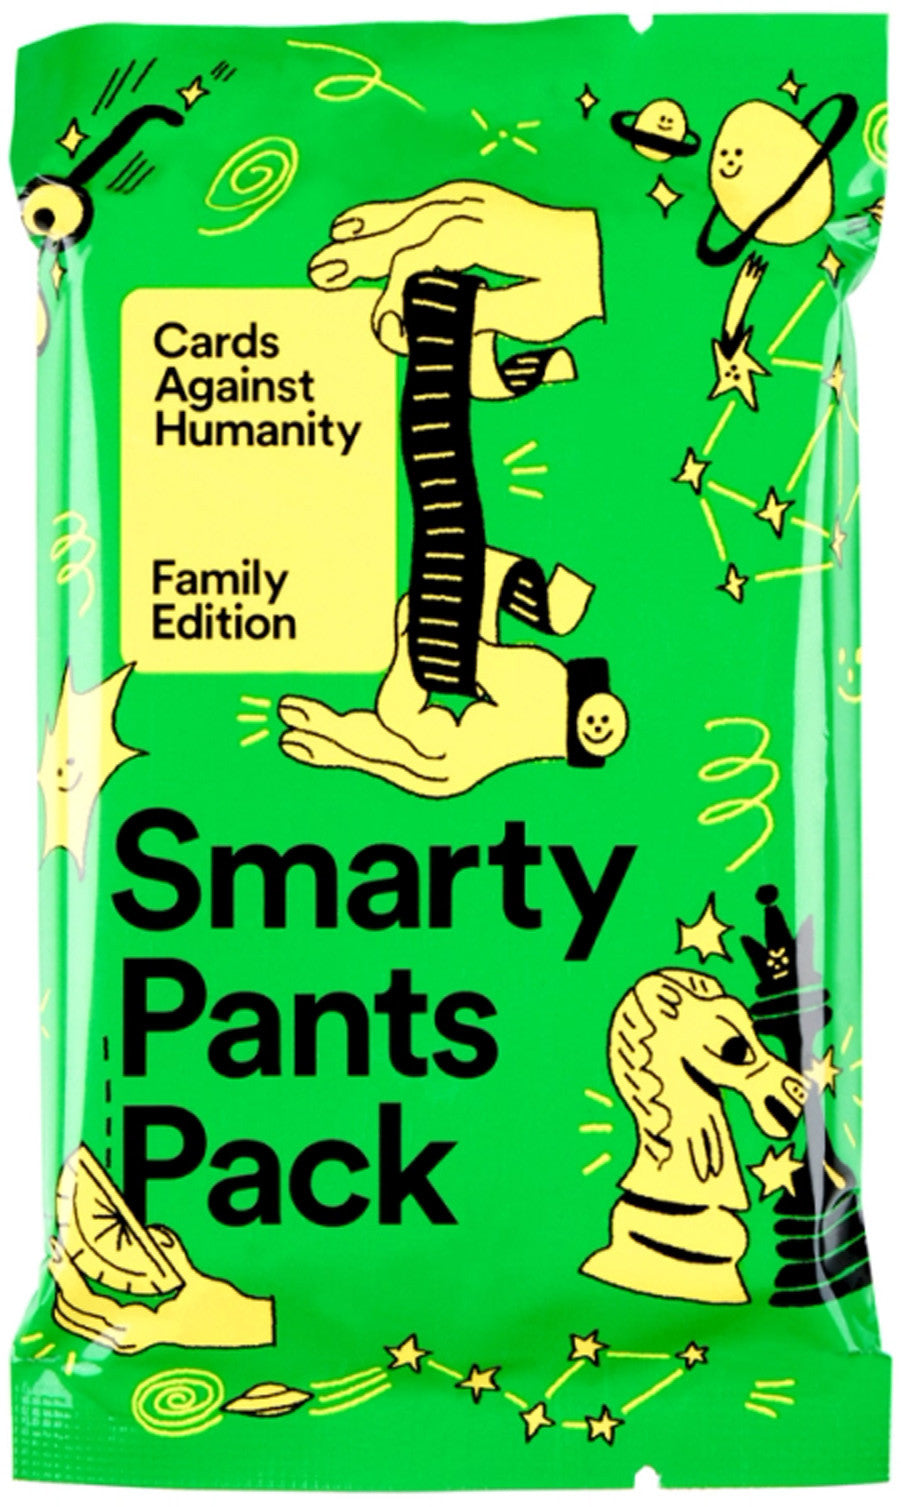 Cards Against Humanity Smarty Pants Pack